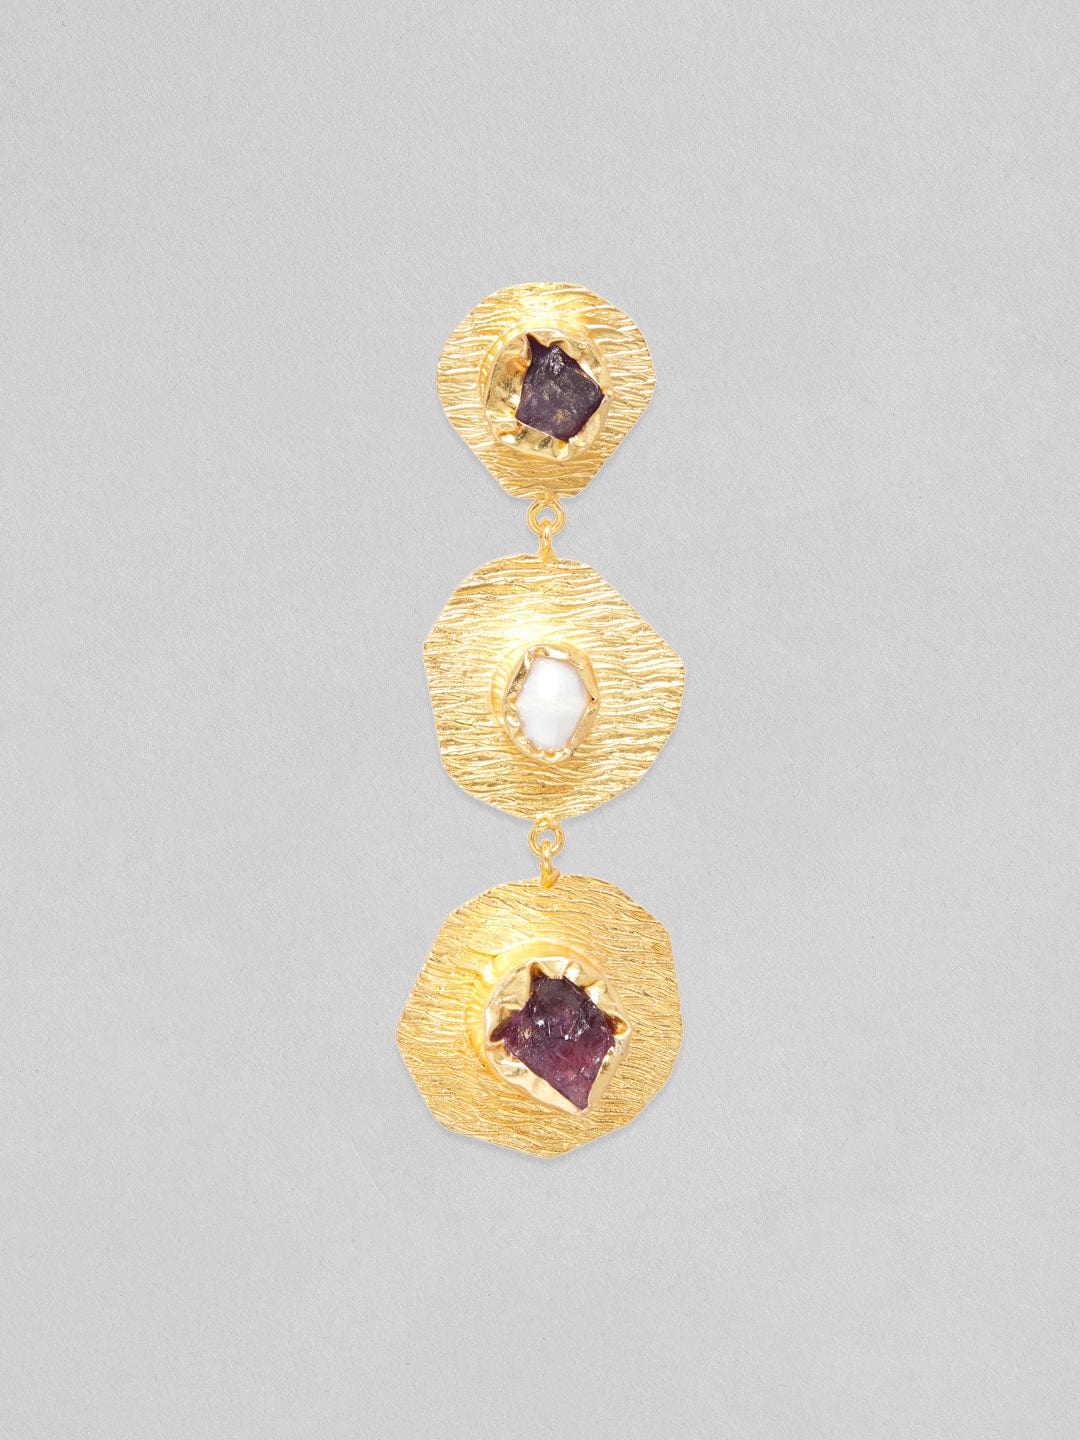 Rubans Voguish 18K Gold Plated On Copper Handcrafted With Uncut Stoneshammered Dangle Earrings. Earrings